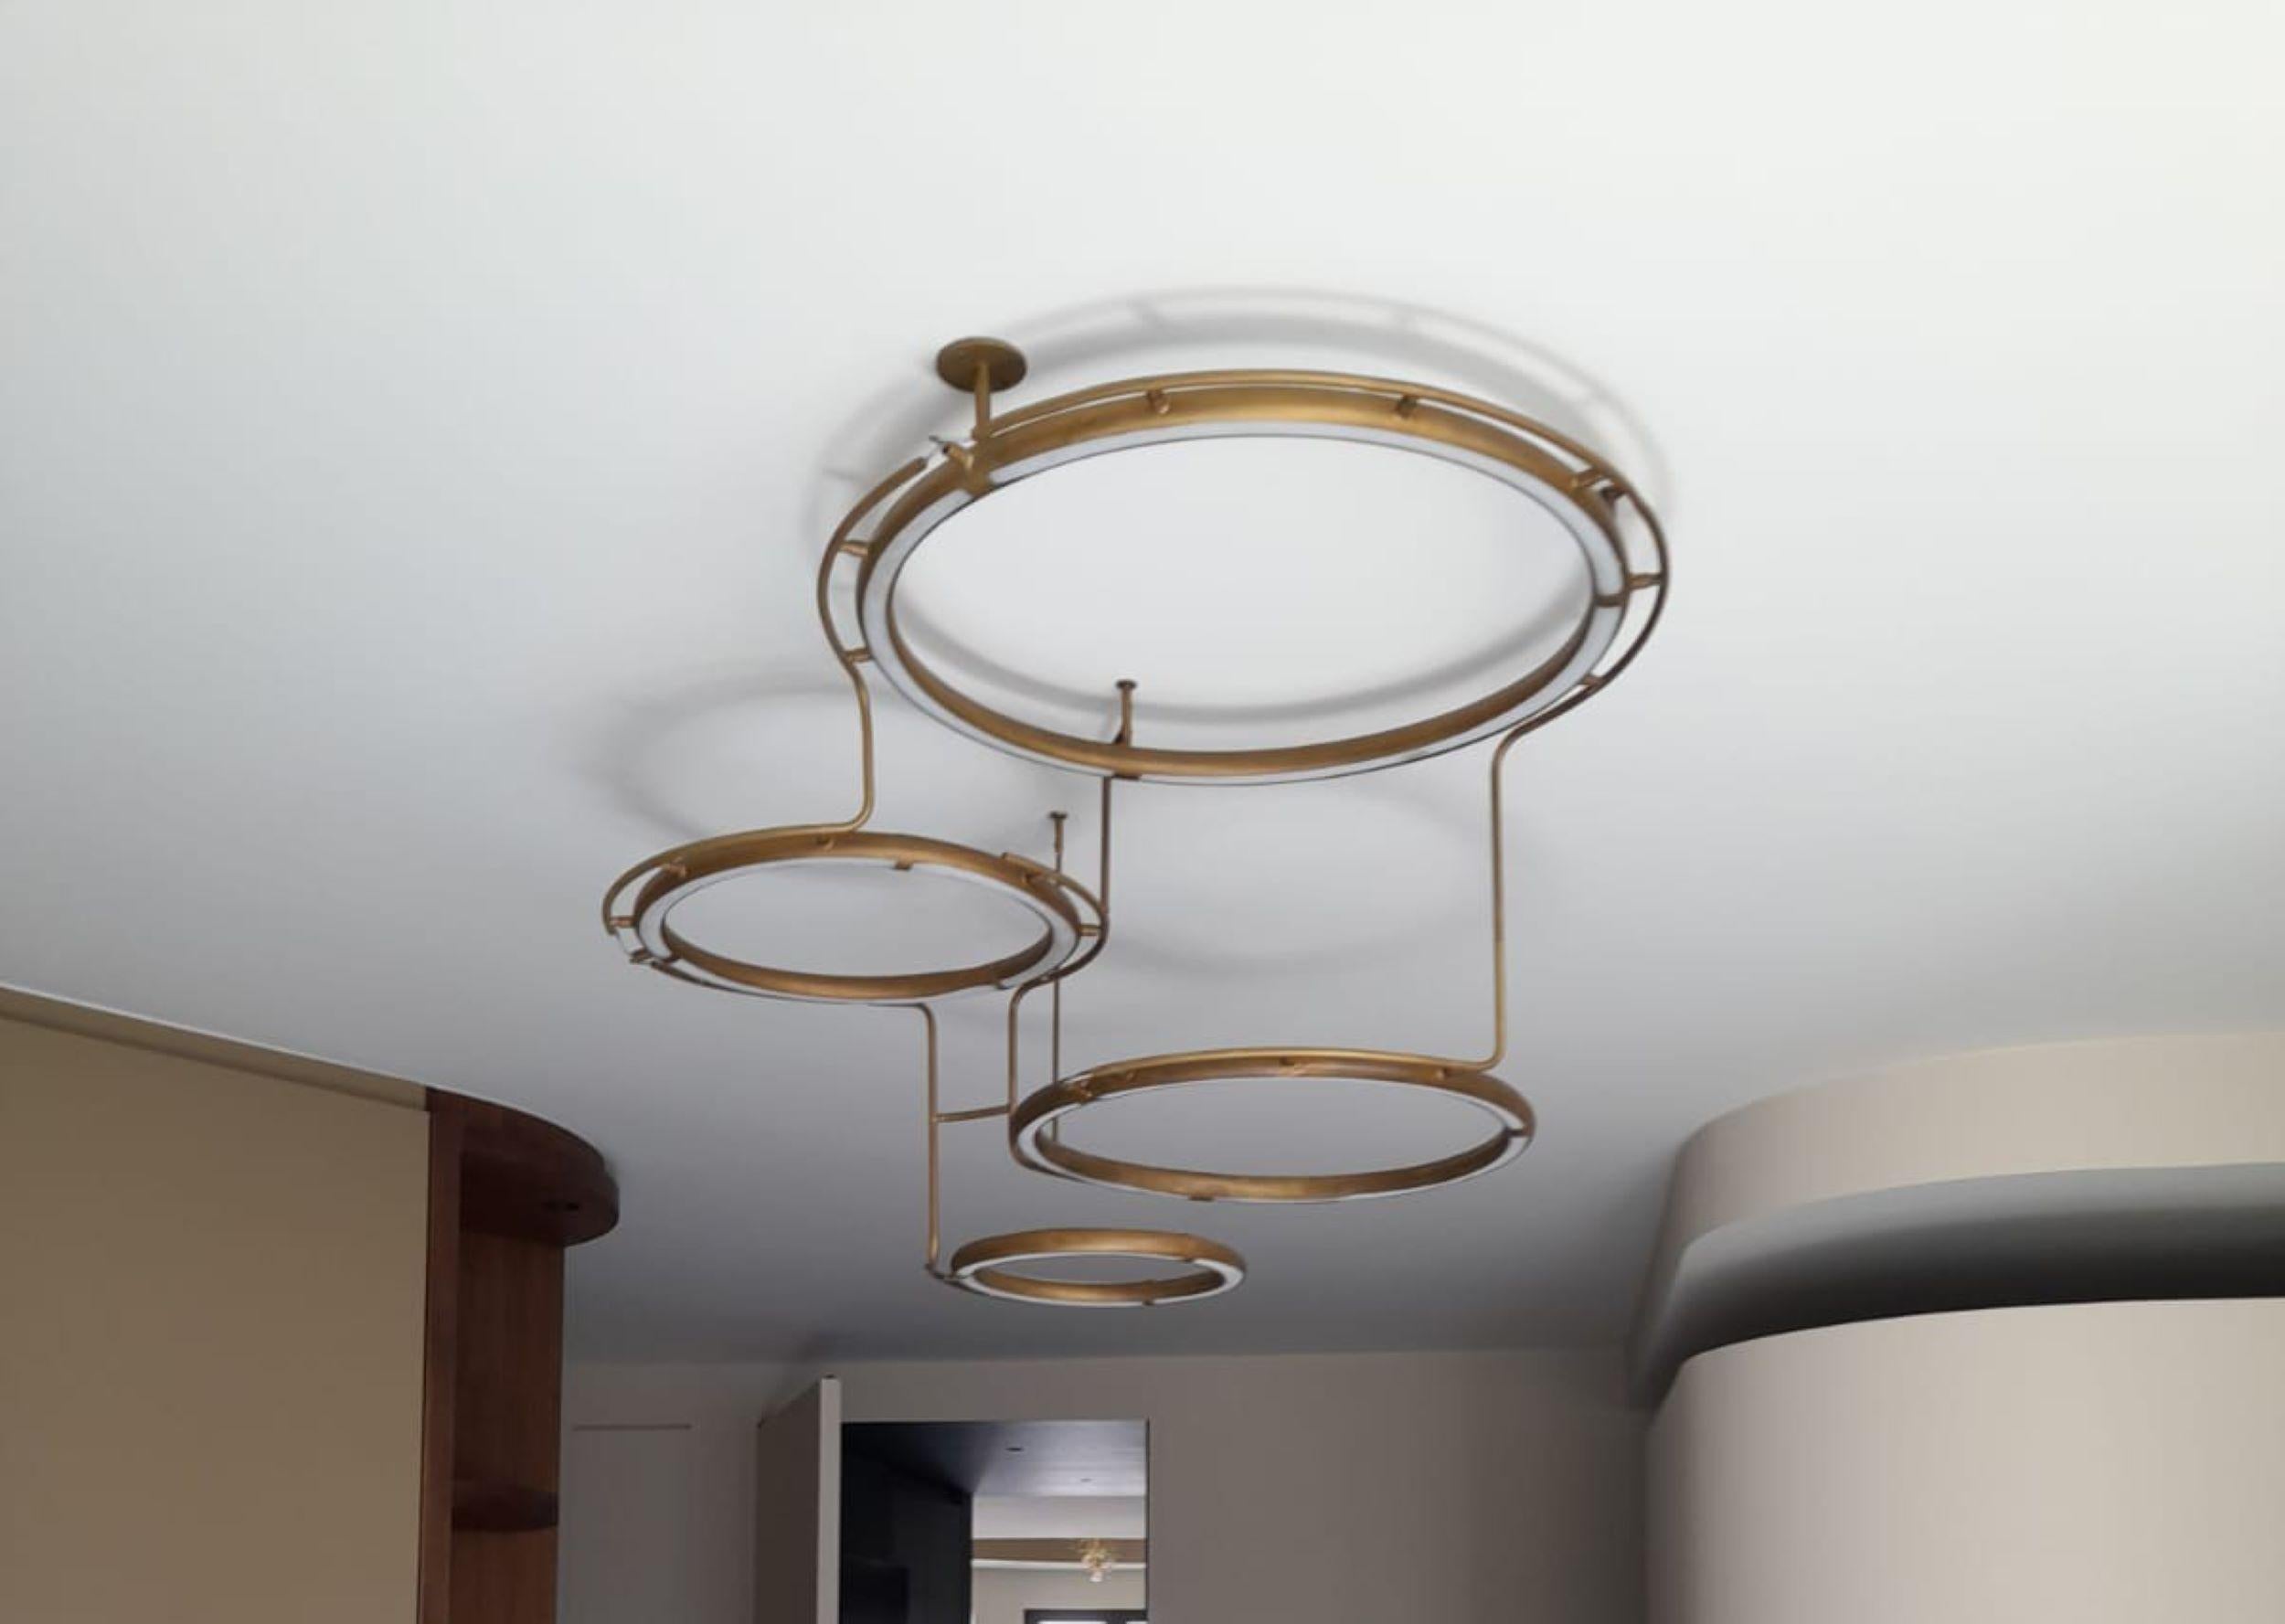 This pendant is a construction of 4 brass rings with flexible led tubes in the rings. The rings are connected to each other and hang over and next to each other. 
Measures: There is 1 ring of 51 cm, 1 ring of 41,5 cm, 1 ring of 35,5 cm and 1 ring